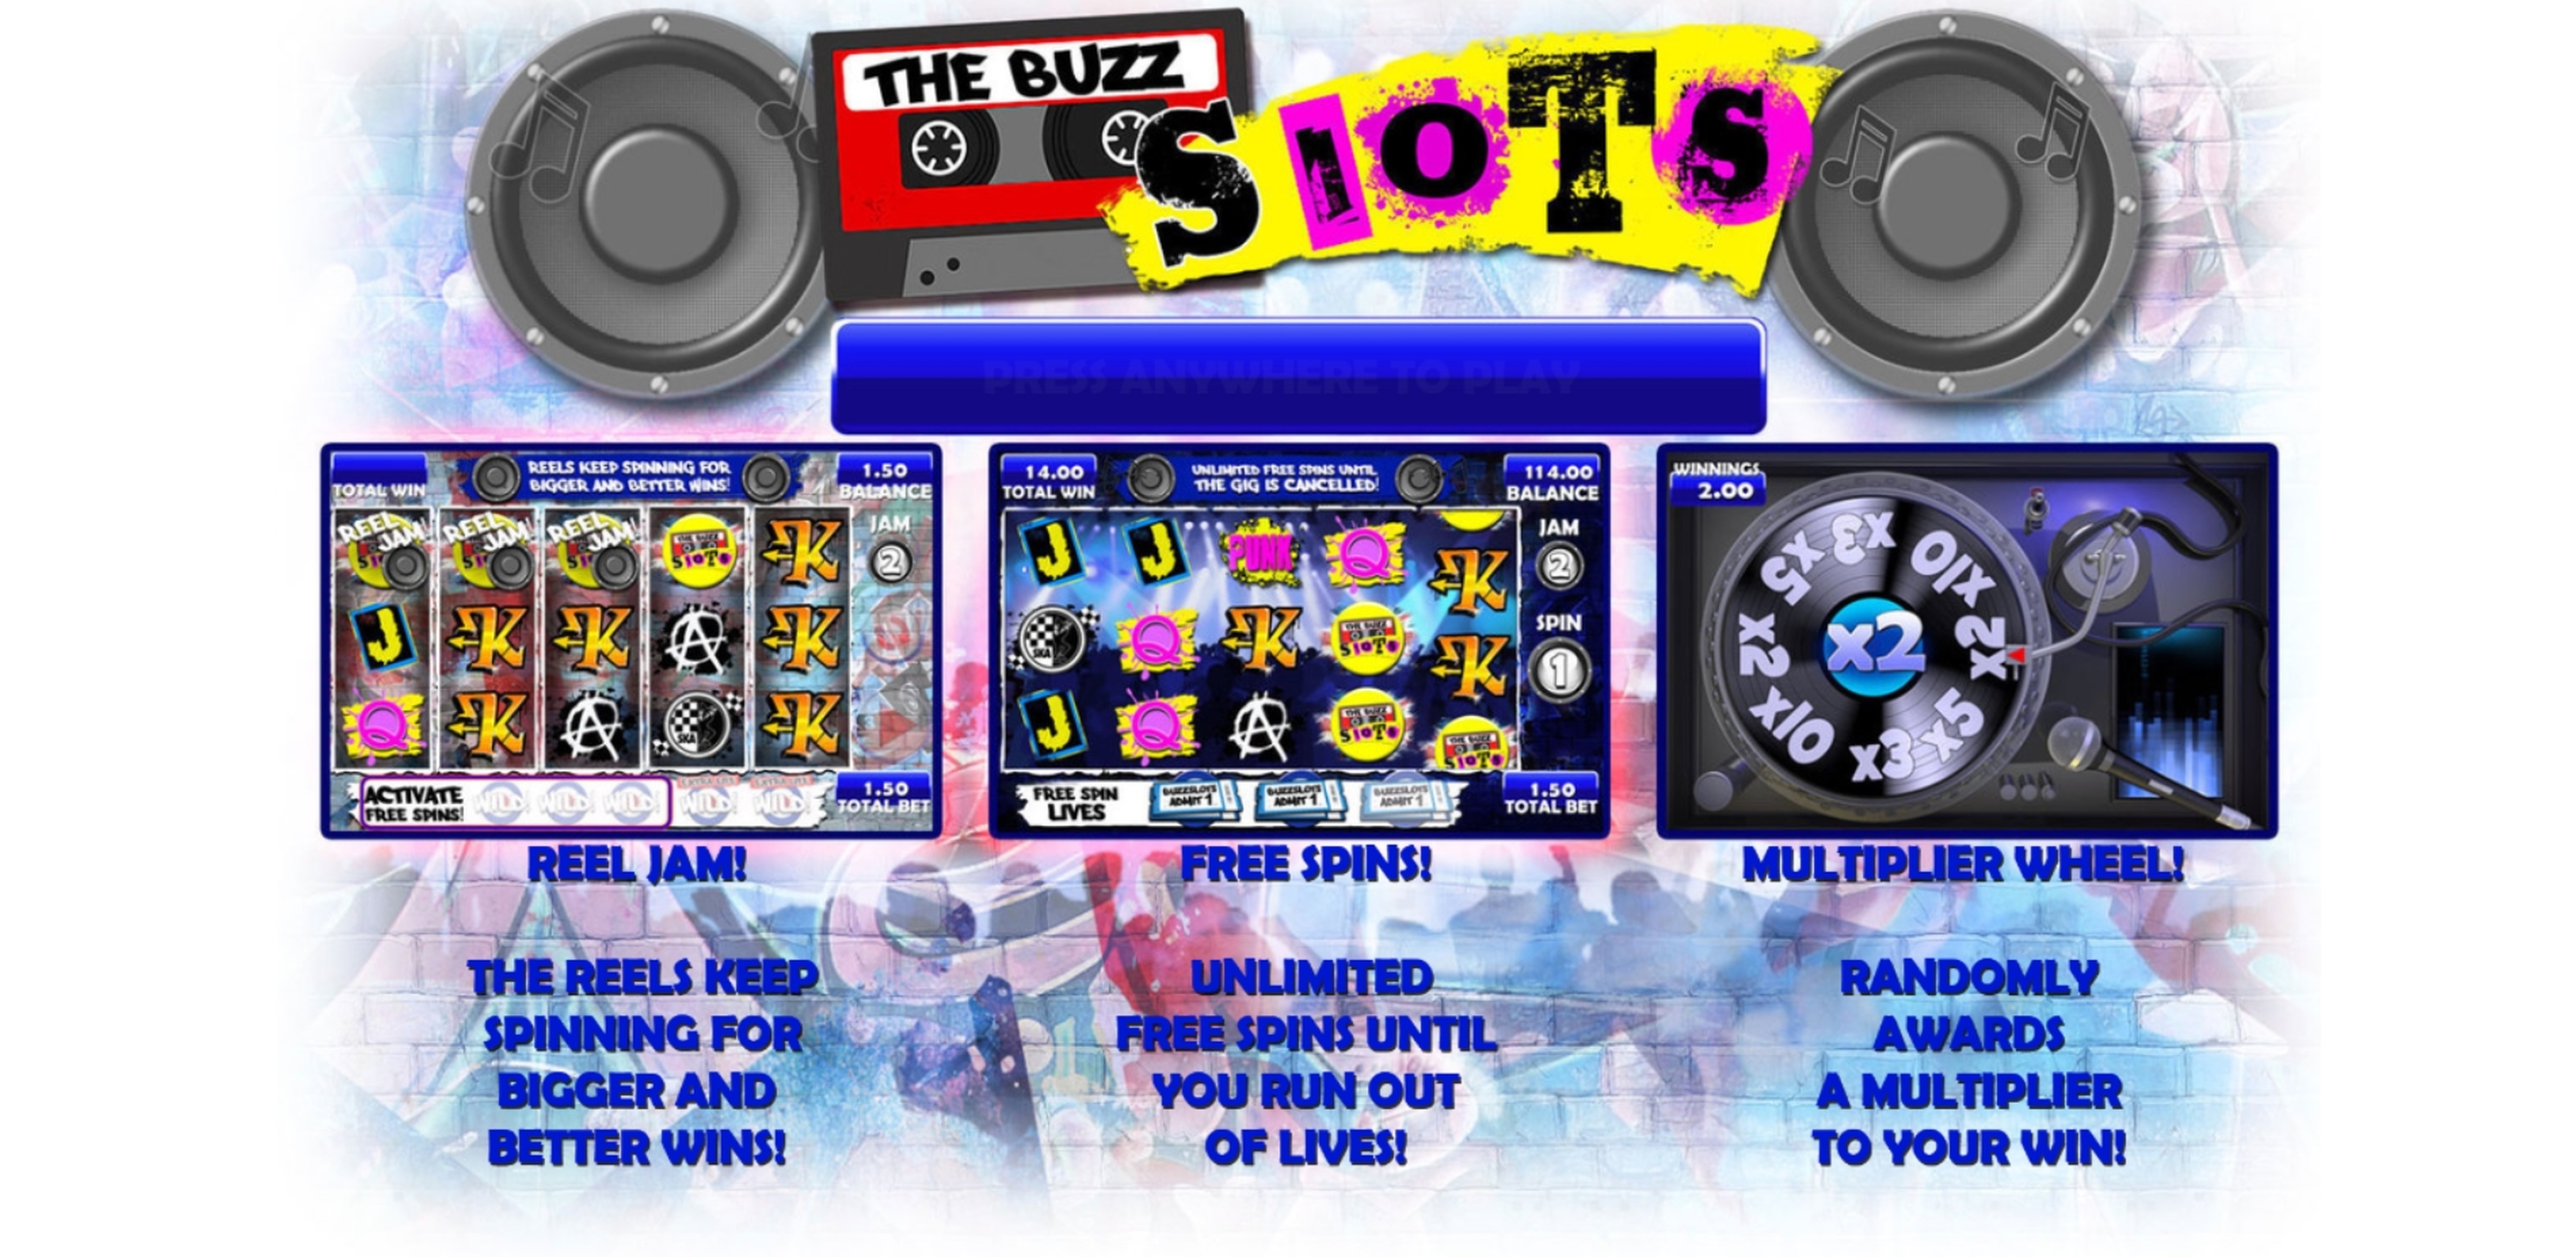 Play The Buzz Slots Free Casino Slot Game by Games Warehouse